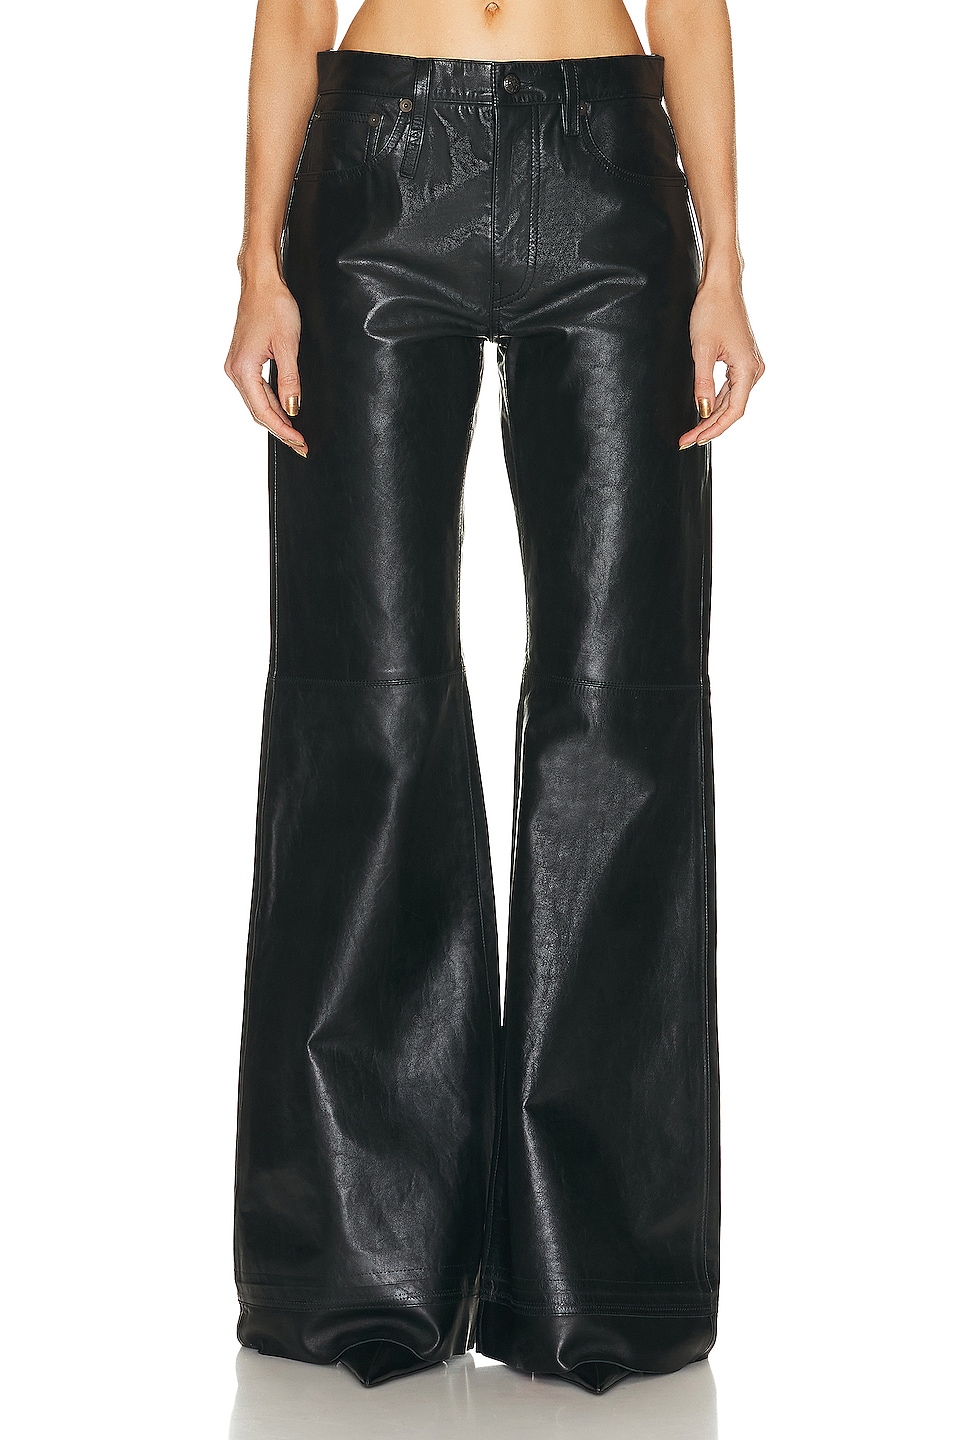 Брюки R13 Janet Relaxed Flair Leather, цвет Shiny Black